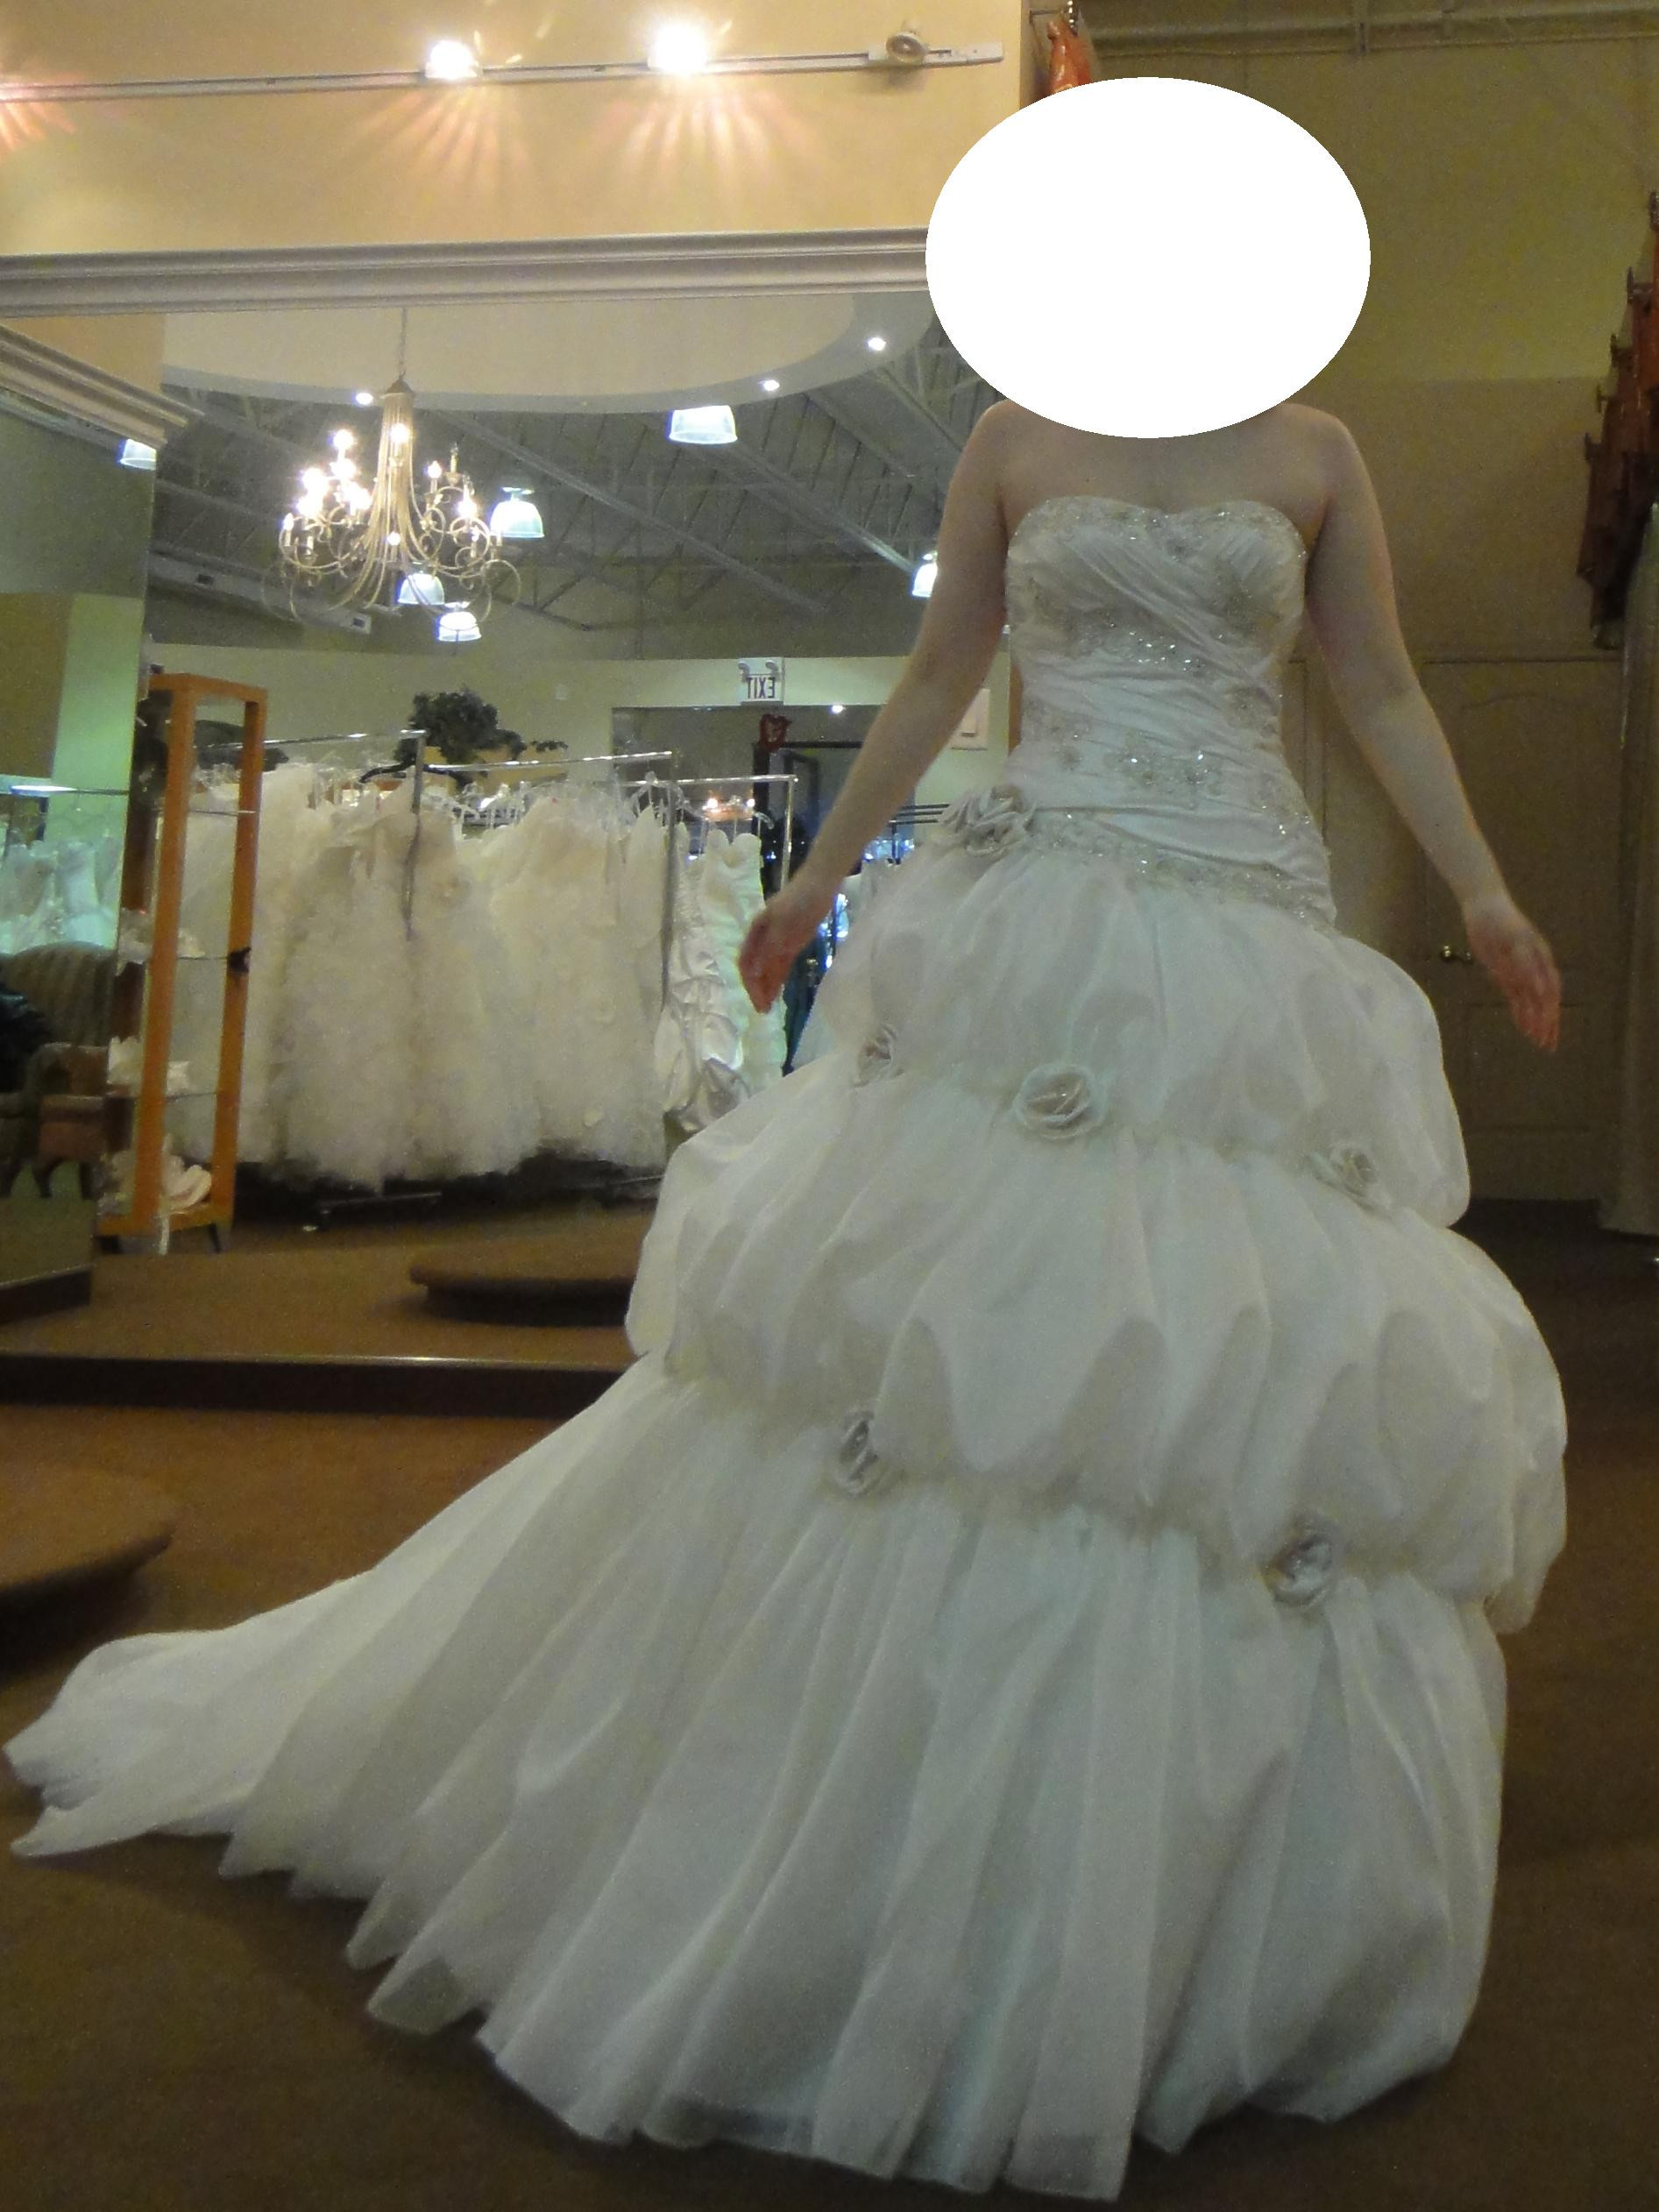 Ugly Wedding Gowns
 ugly wedding dresses unhappybride